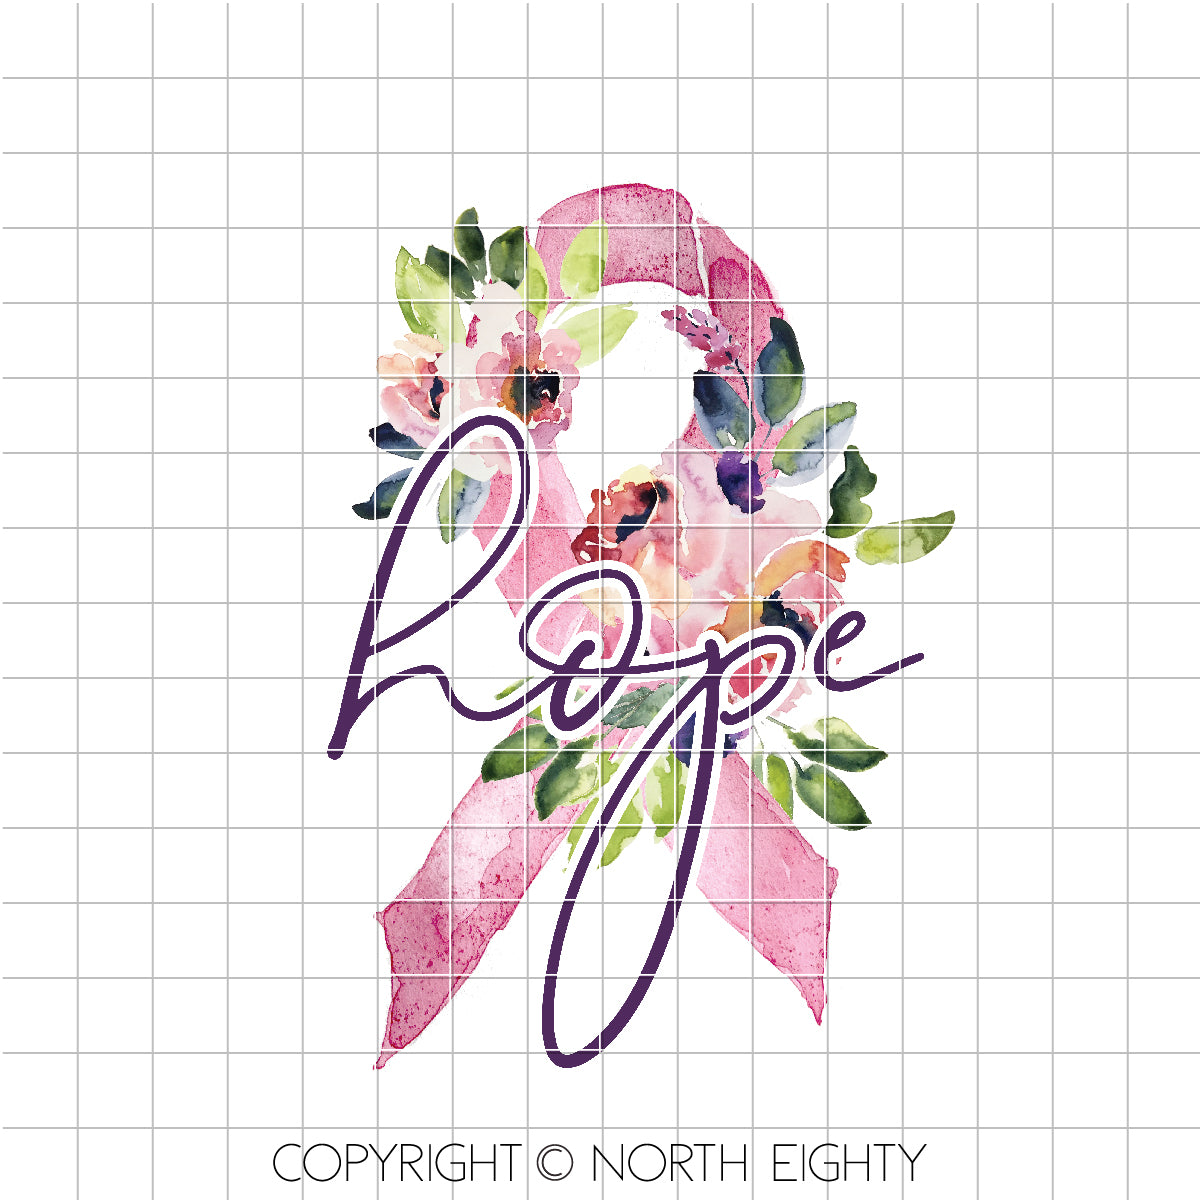 Hope Breast Cancer Ribbon png